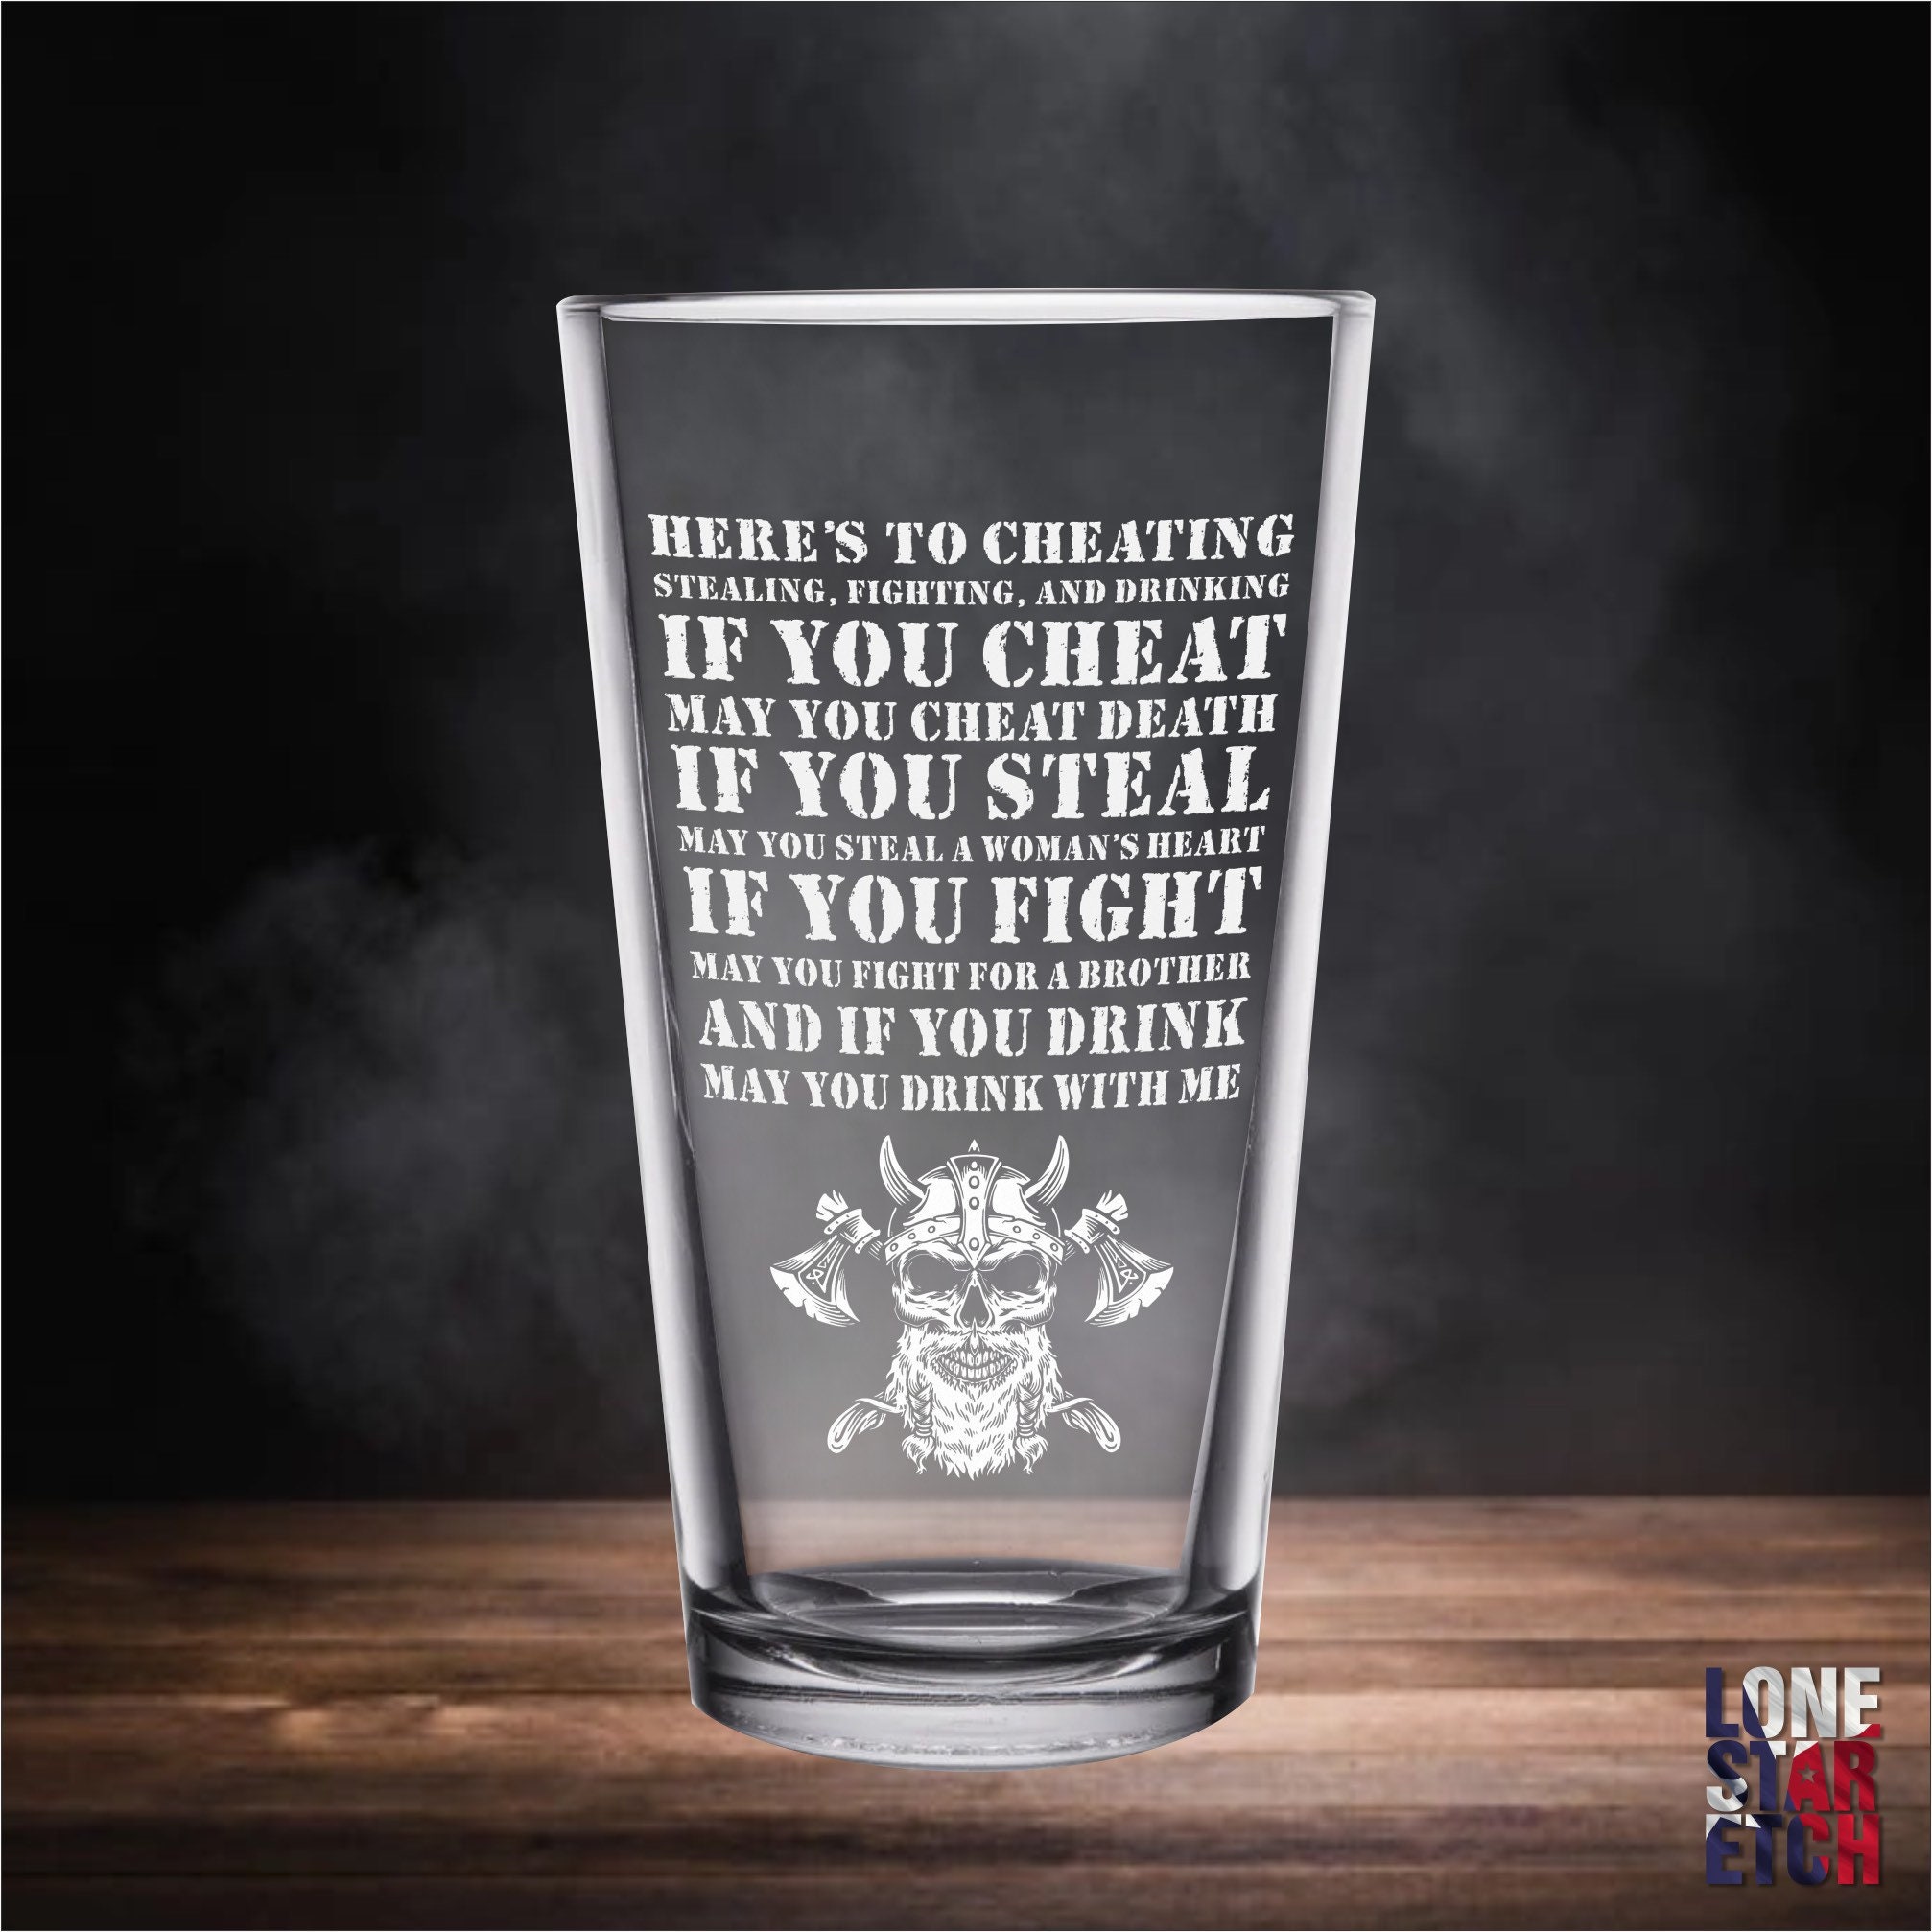 Custom Quote Pint Glasses - Set of 2 – Gifts for Good